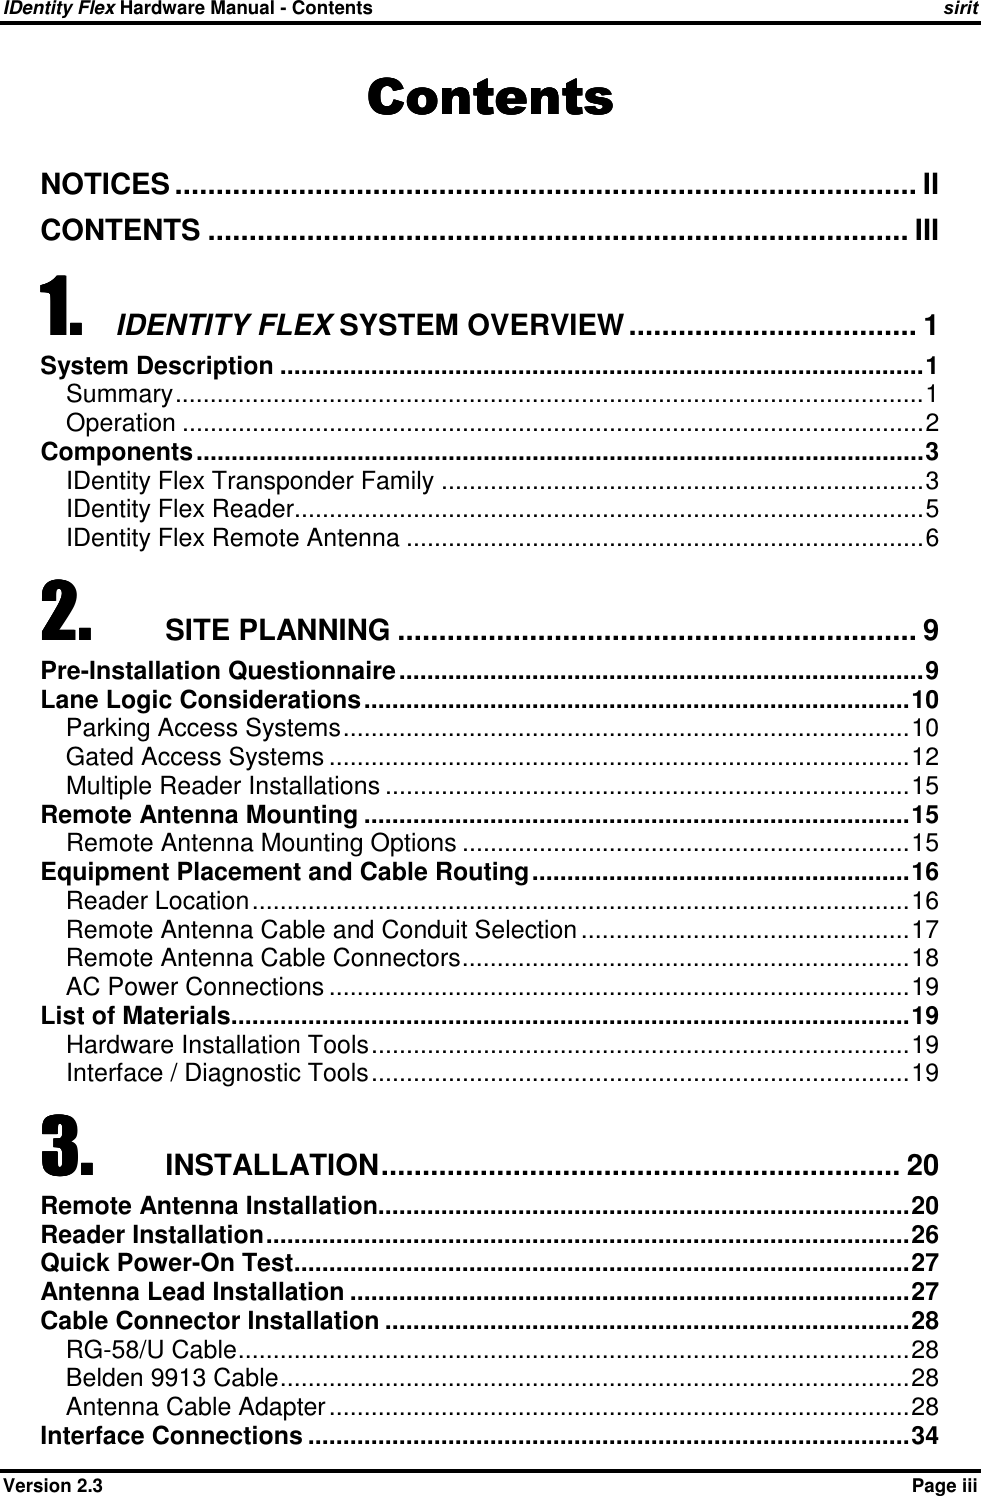 IDentity Flex Hardware Manual - Contents    sirit    Version 2.3    Page iii ContentsContentsContentsContents    NOTICES .......................................................................................... II CONTENTS ..................................................................................... III 1.1.1.1. IDENTITY FLEX SYSTEM OVERVIEW ................................... 1 System Description ............................................................................................1 Summary...........................................................................................................1 Operation ..........................................................................................................2 Components........................................................................................................3 IDentity Flex Transponder Family .....................................................................3 IDentity Flex Reader..........................................................................................5 IDentity Flex Remote Antenna ..........................................................................6 2.2.2.2. SITE PLANNING ............................................................... 9 Pre-Installation Questionnaire...........................................................................9 Lane Logic Considerations..............................................................................10 Parking Access Systems.................................................................................10 Gated Access Systems ...................................................................................12 Multiple Reader Installations ...........................................................................15 Remote Antenna Mounting ..............................................................................15 Remote Antenna Mounting Options ................................................................15 Equipment Placement and Cable Routing......................................................16 Reader Location..............................................................................................16 Remote Antenna Cable and Conduit Selection ...............................................17 Remote Antenna Cable Connectors................................................................18 AC Power Connections ...................................................................................19 List of Materials.................................................................................................19 Hardware Installation Tools.............................................................................19 Interface / Diagnostic Tools.............................................................................19 3.3.3.3. INSTALLATION............................................................... 20 Remote Antenna Installation............................................................................20 Reader Installation............................................................................................26 Quick Power-On Test........................................................................................27 Antenna Lead Installation ................................................................................27 Cable Connector Installation ...........................................................................28 RG-58/U Cable................................................................................................28 Belden 9913 Cable..........................................................................................28 Antenna Cable Adapter...................................................................................28 Interface Connections ......................................................................................34 